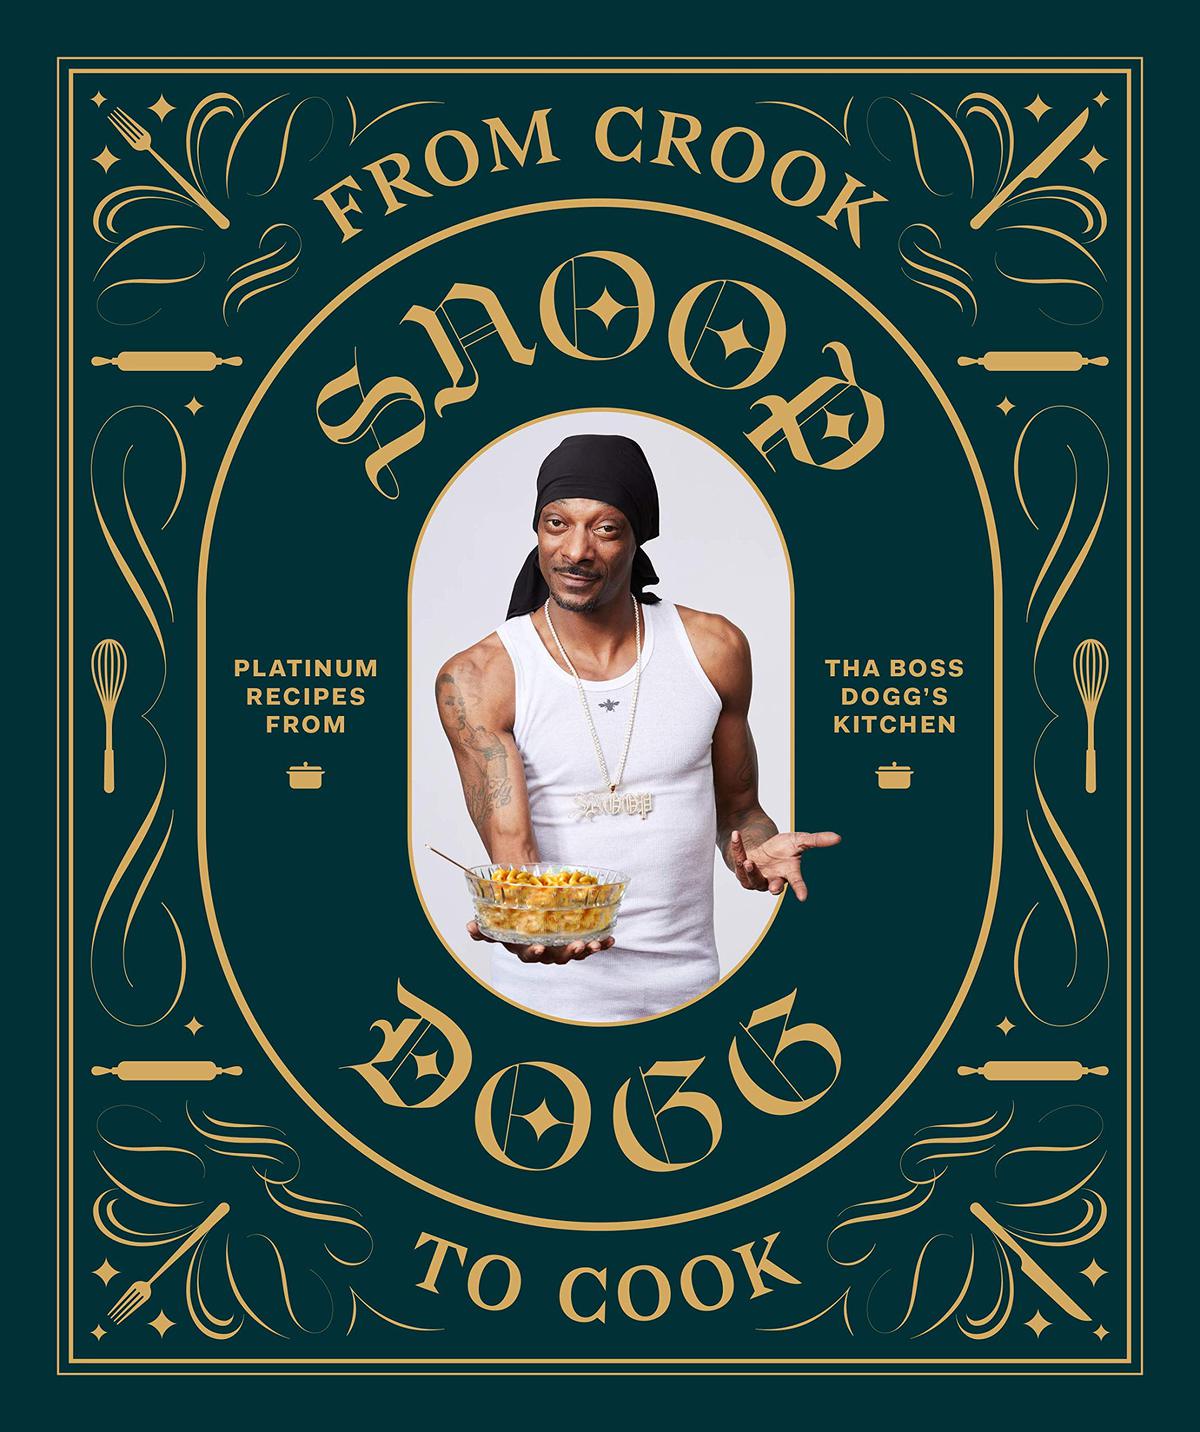 Book - \"From Crook to Cook\" by Snoop Dog